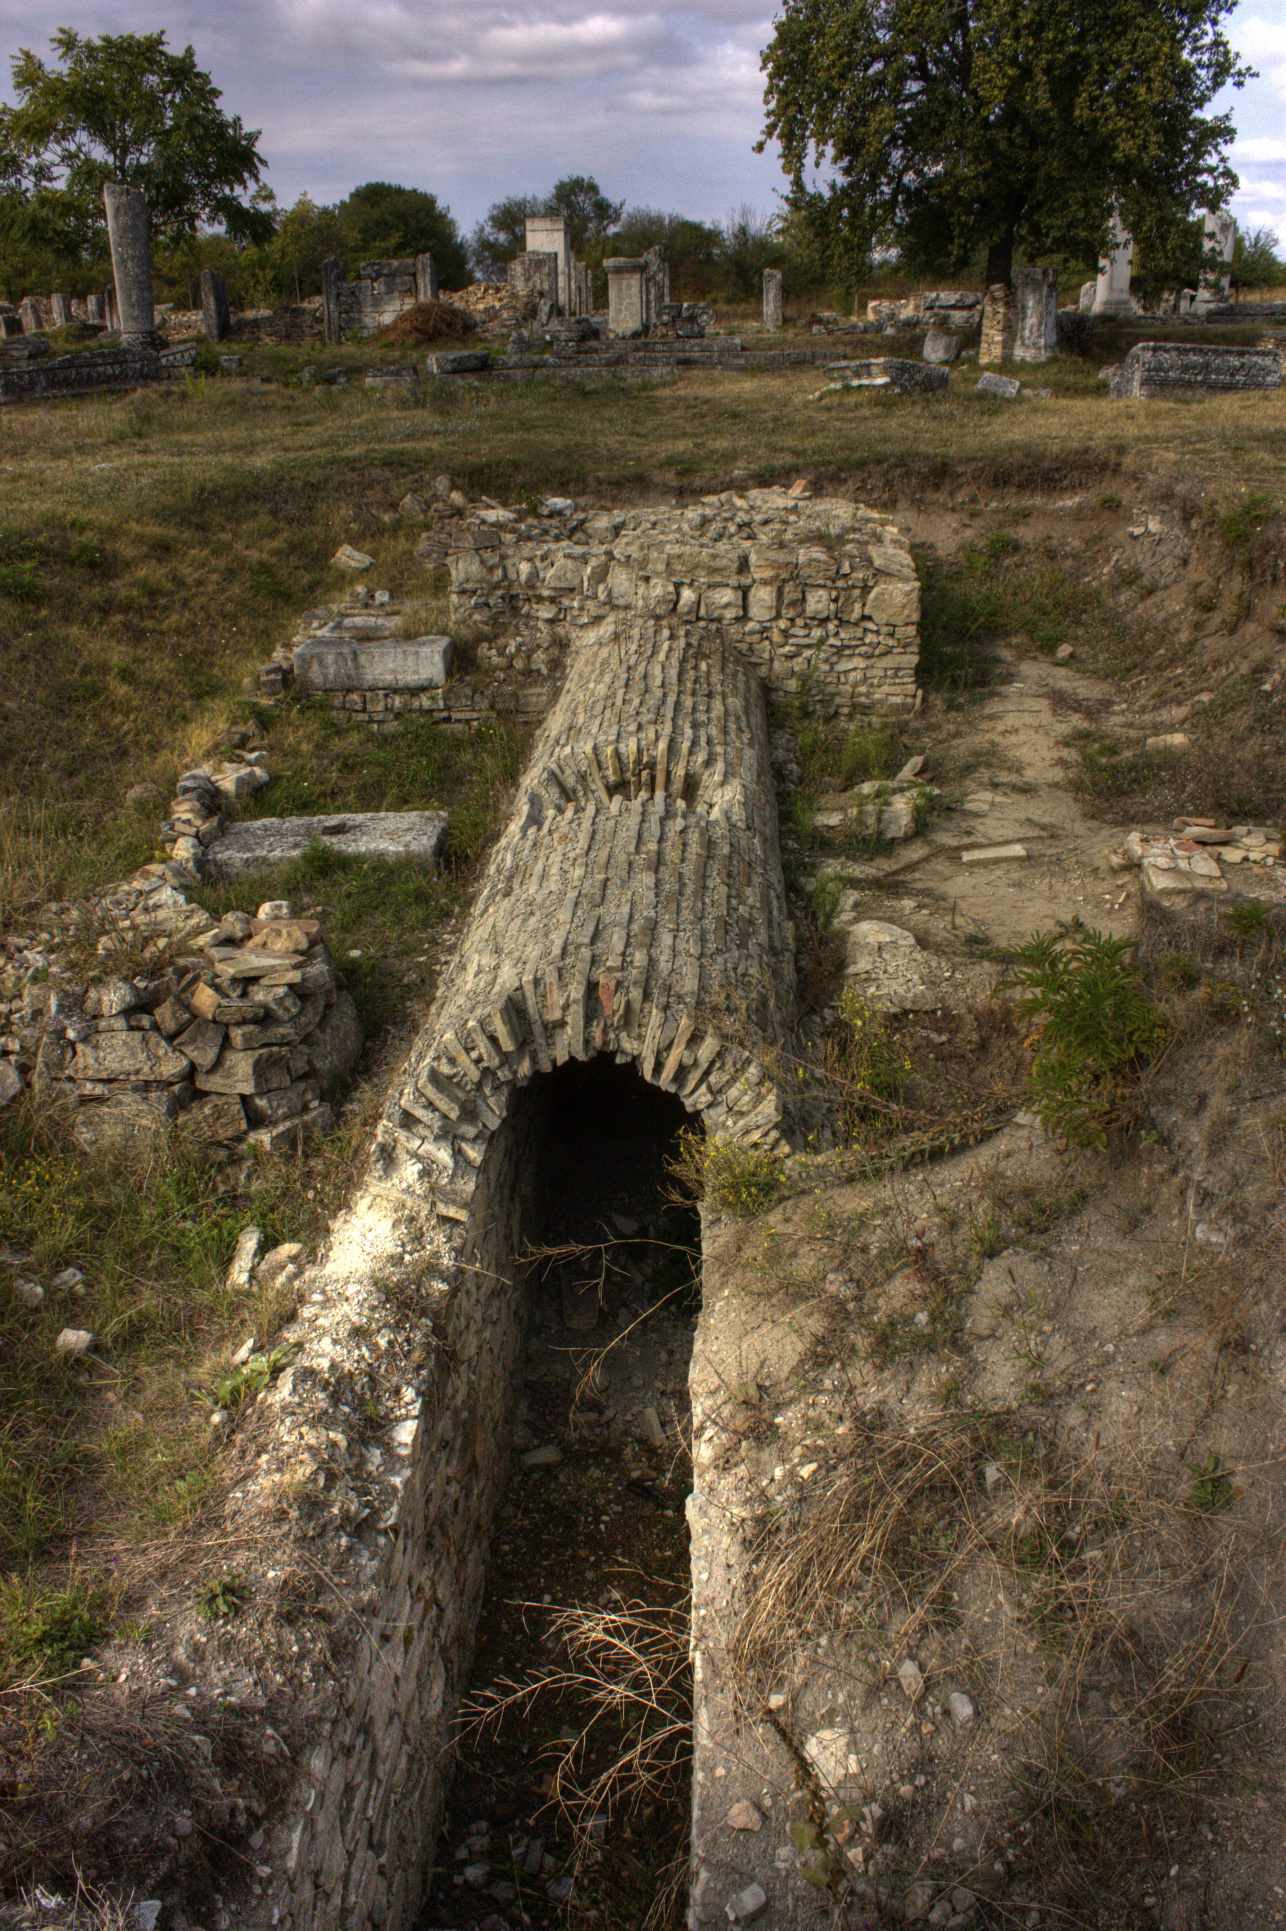 The sewage system of the ancient Roman town Nikopolis ad Istrum, today in Bulgaria: Cloaka maxima (Main sewer channel of the city).